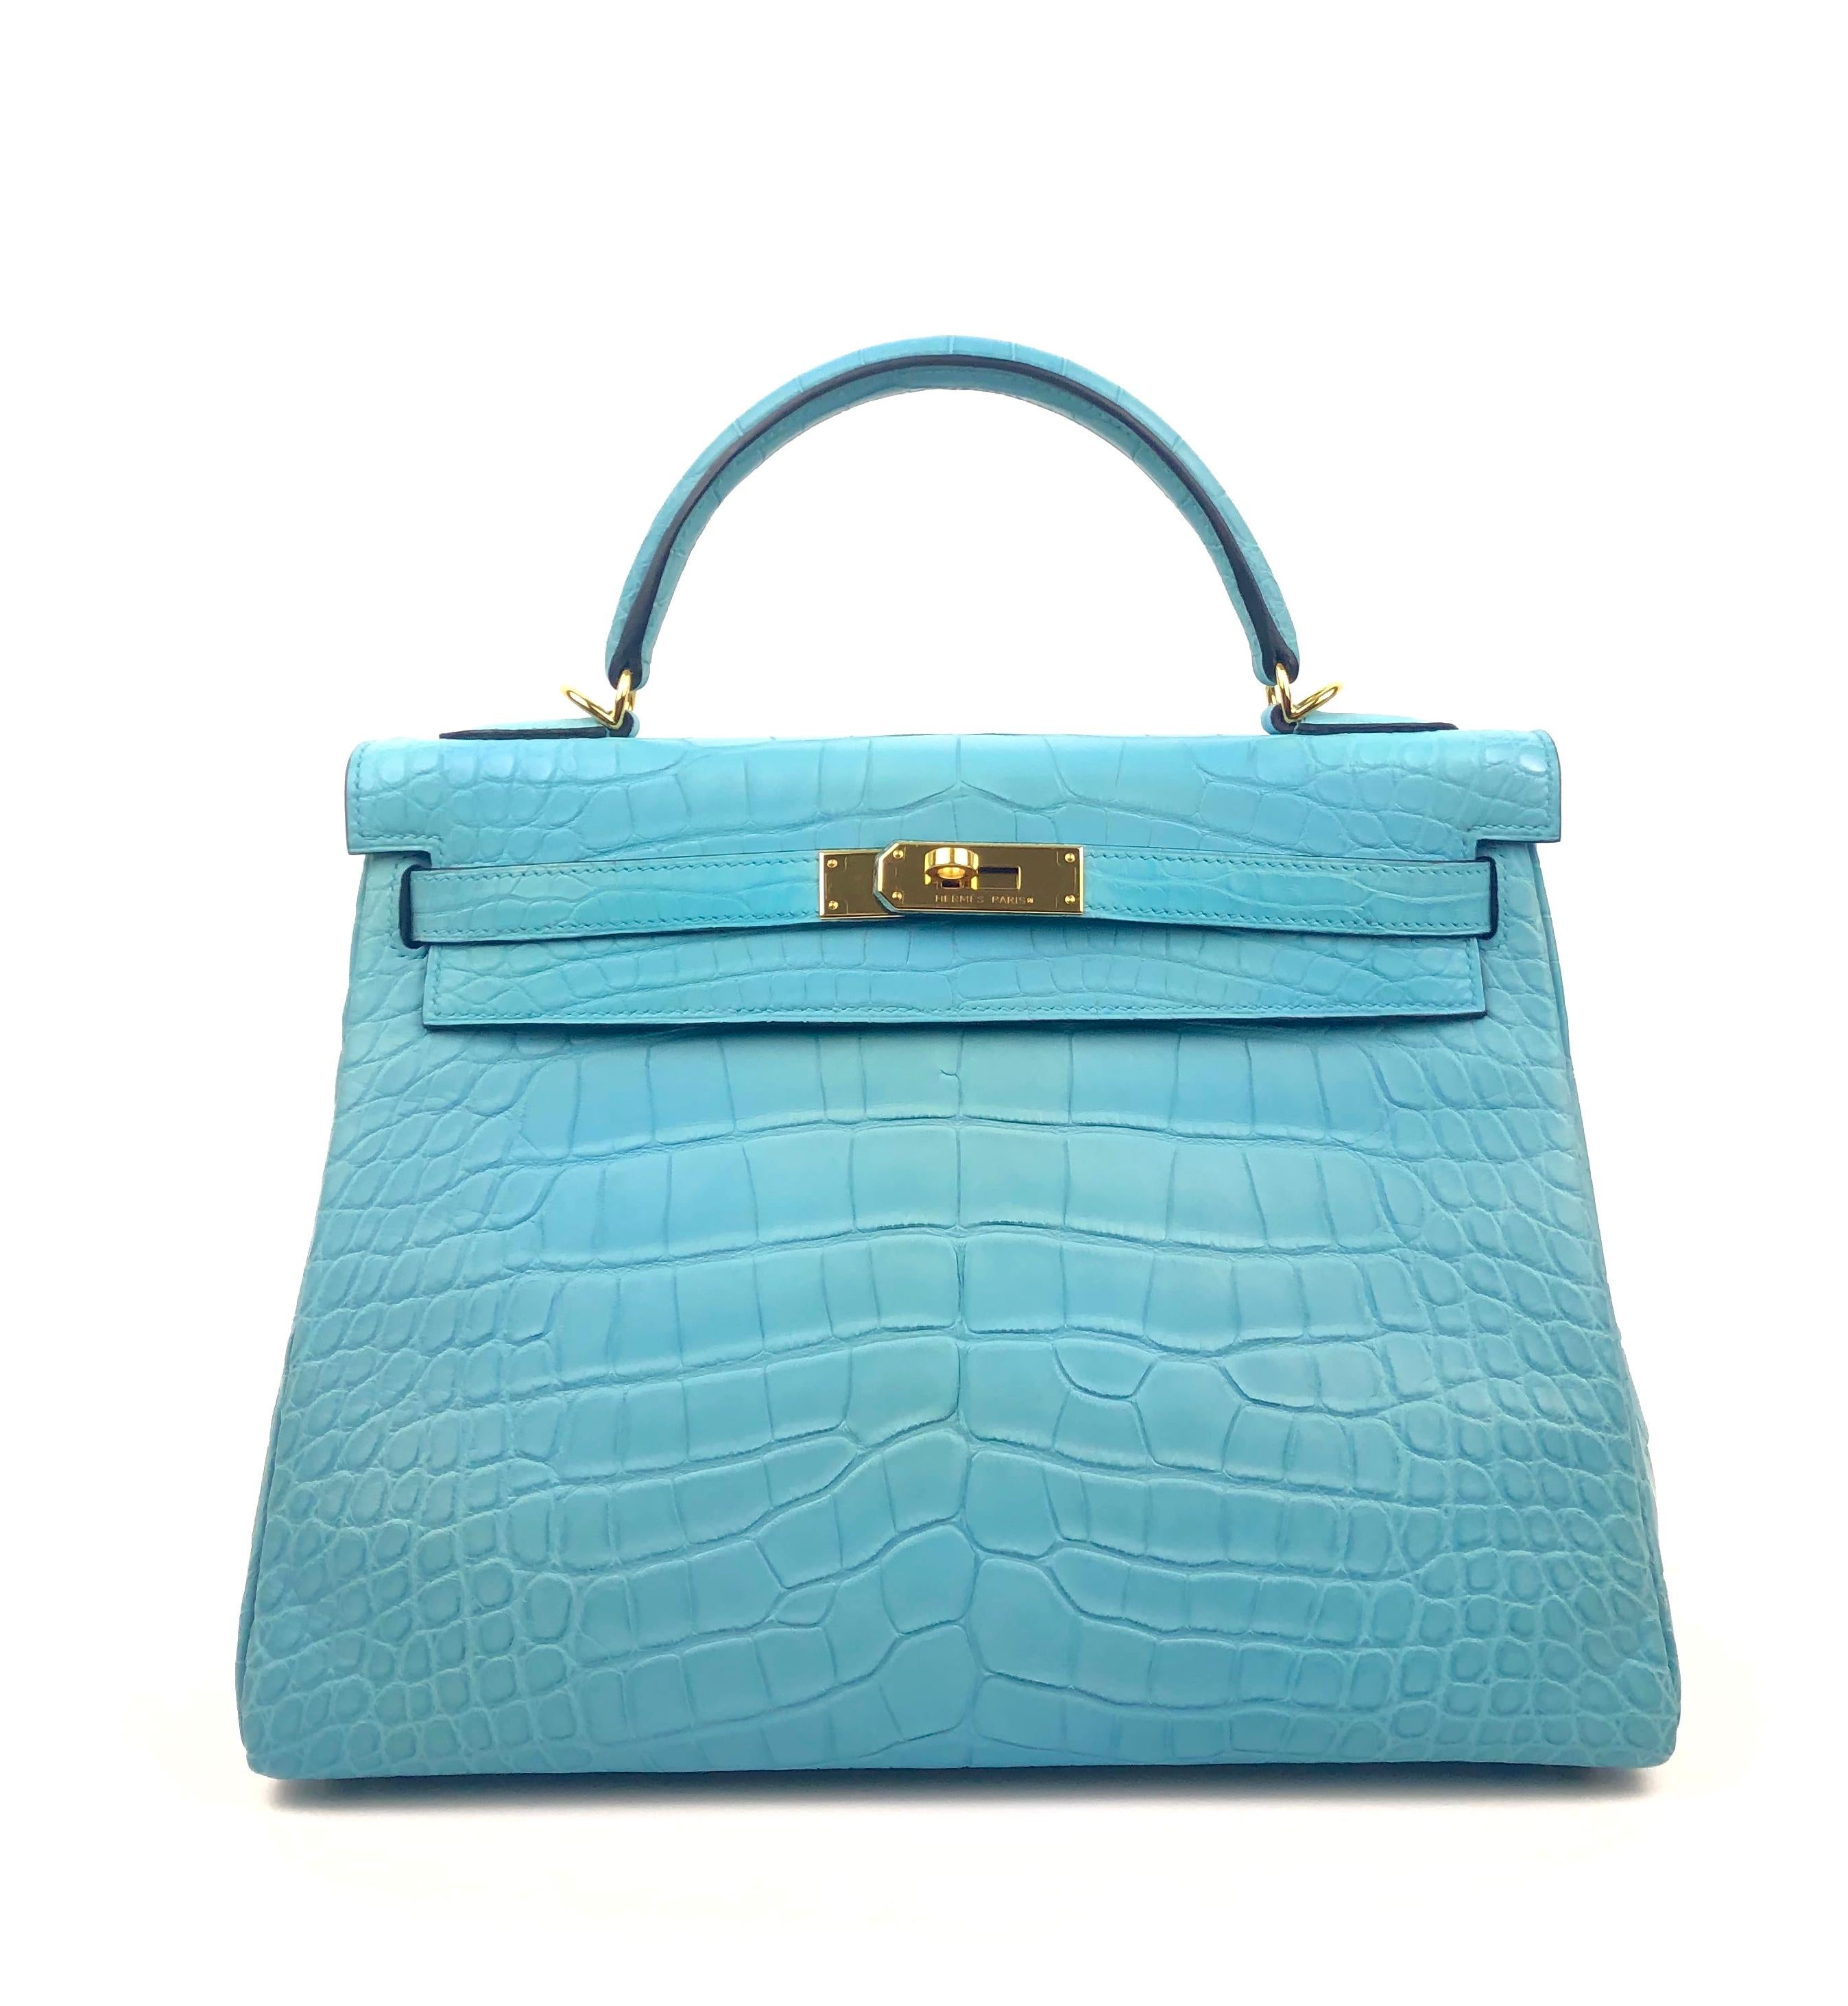 HERMES KELLY 32 BLUE ATOLL MATTE ALLIGATOR MISSISSIPPIEN CROCODILE.
Pristine Condition, Plastic on Hardware. T Stamp 2015.

Shop with Confidence from Lux Addicts. Authenticity Guaranteed!